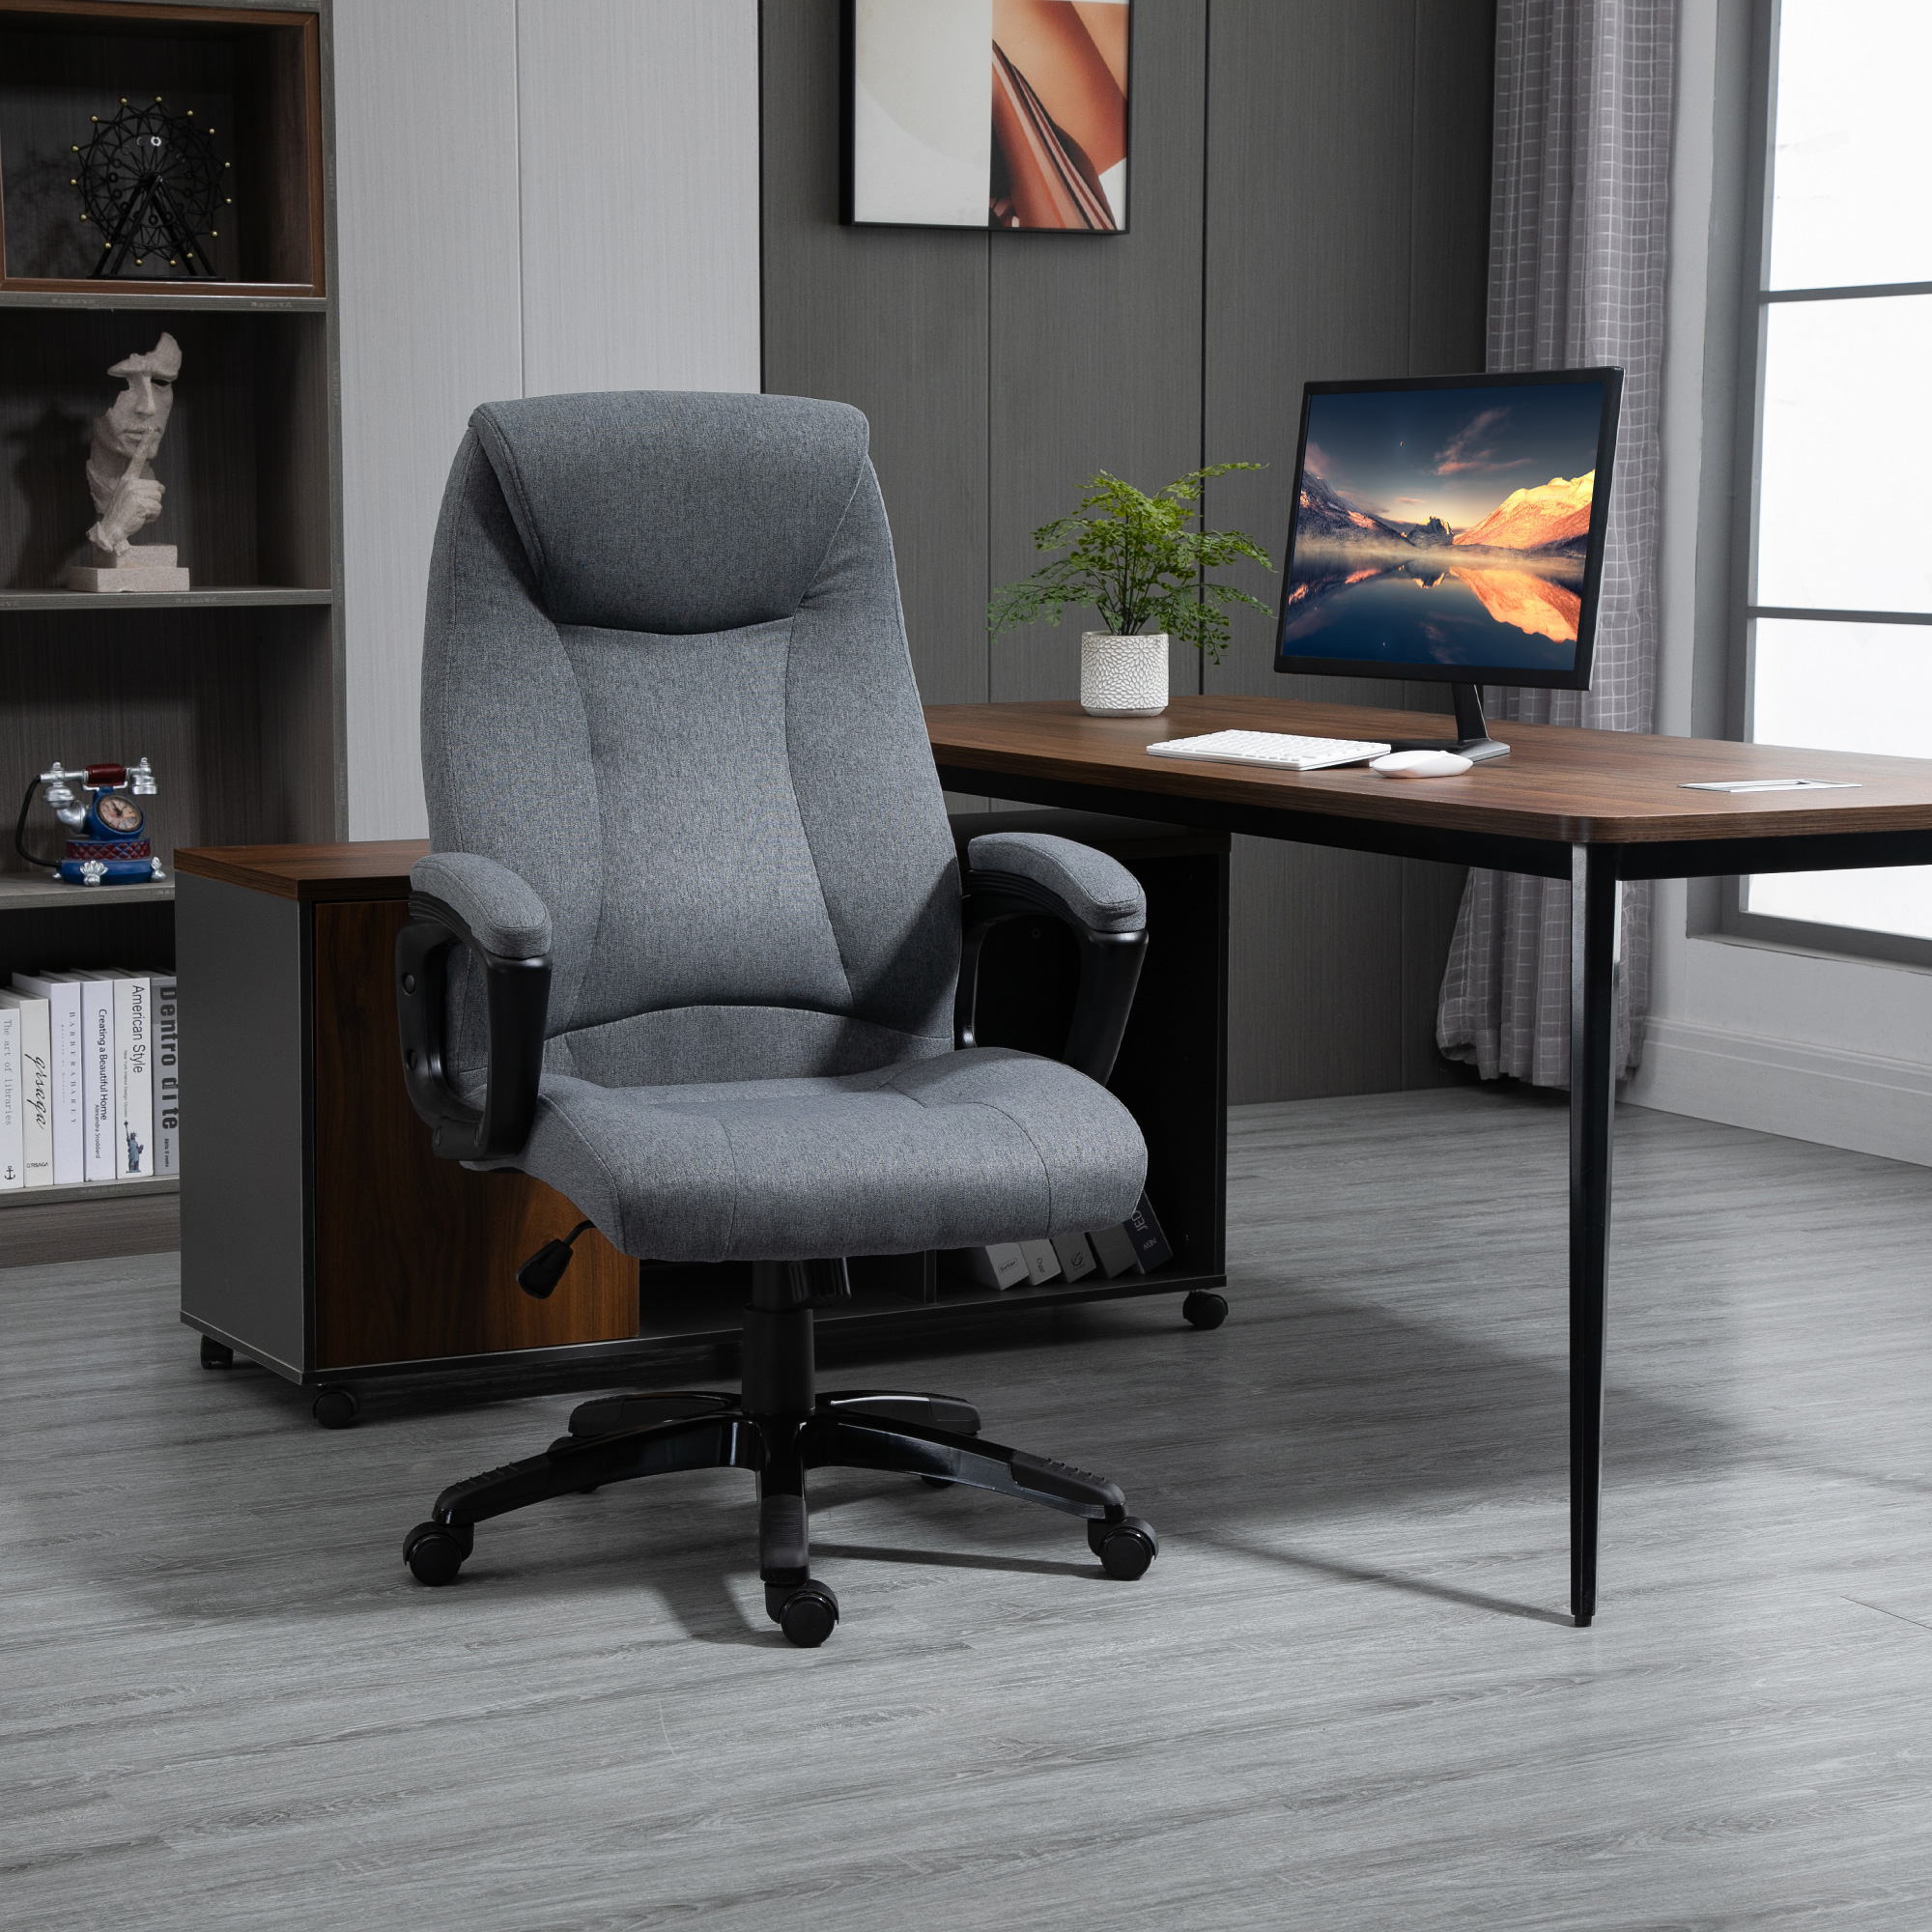 Vinsetto Fabric Home Office Chair, Computer Desk Chair with Tilt Function, Executive Chair with 360 Swivel, Adjustable Height, Padded Armrests and Headrest, Gray - image 4 of 9